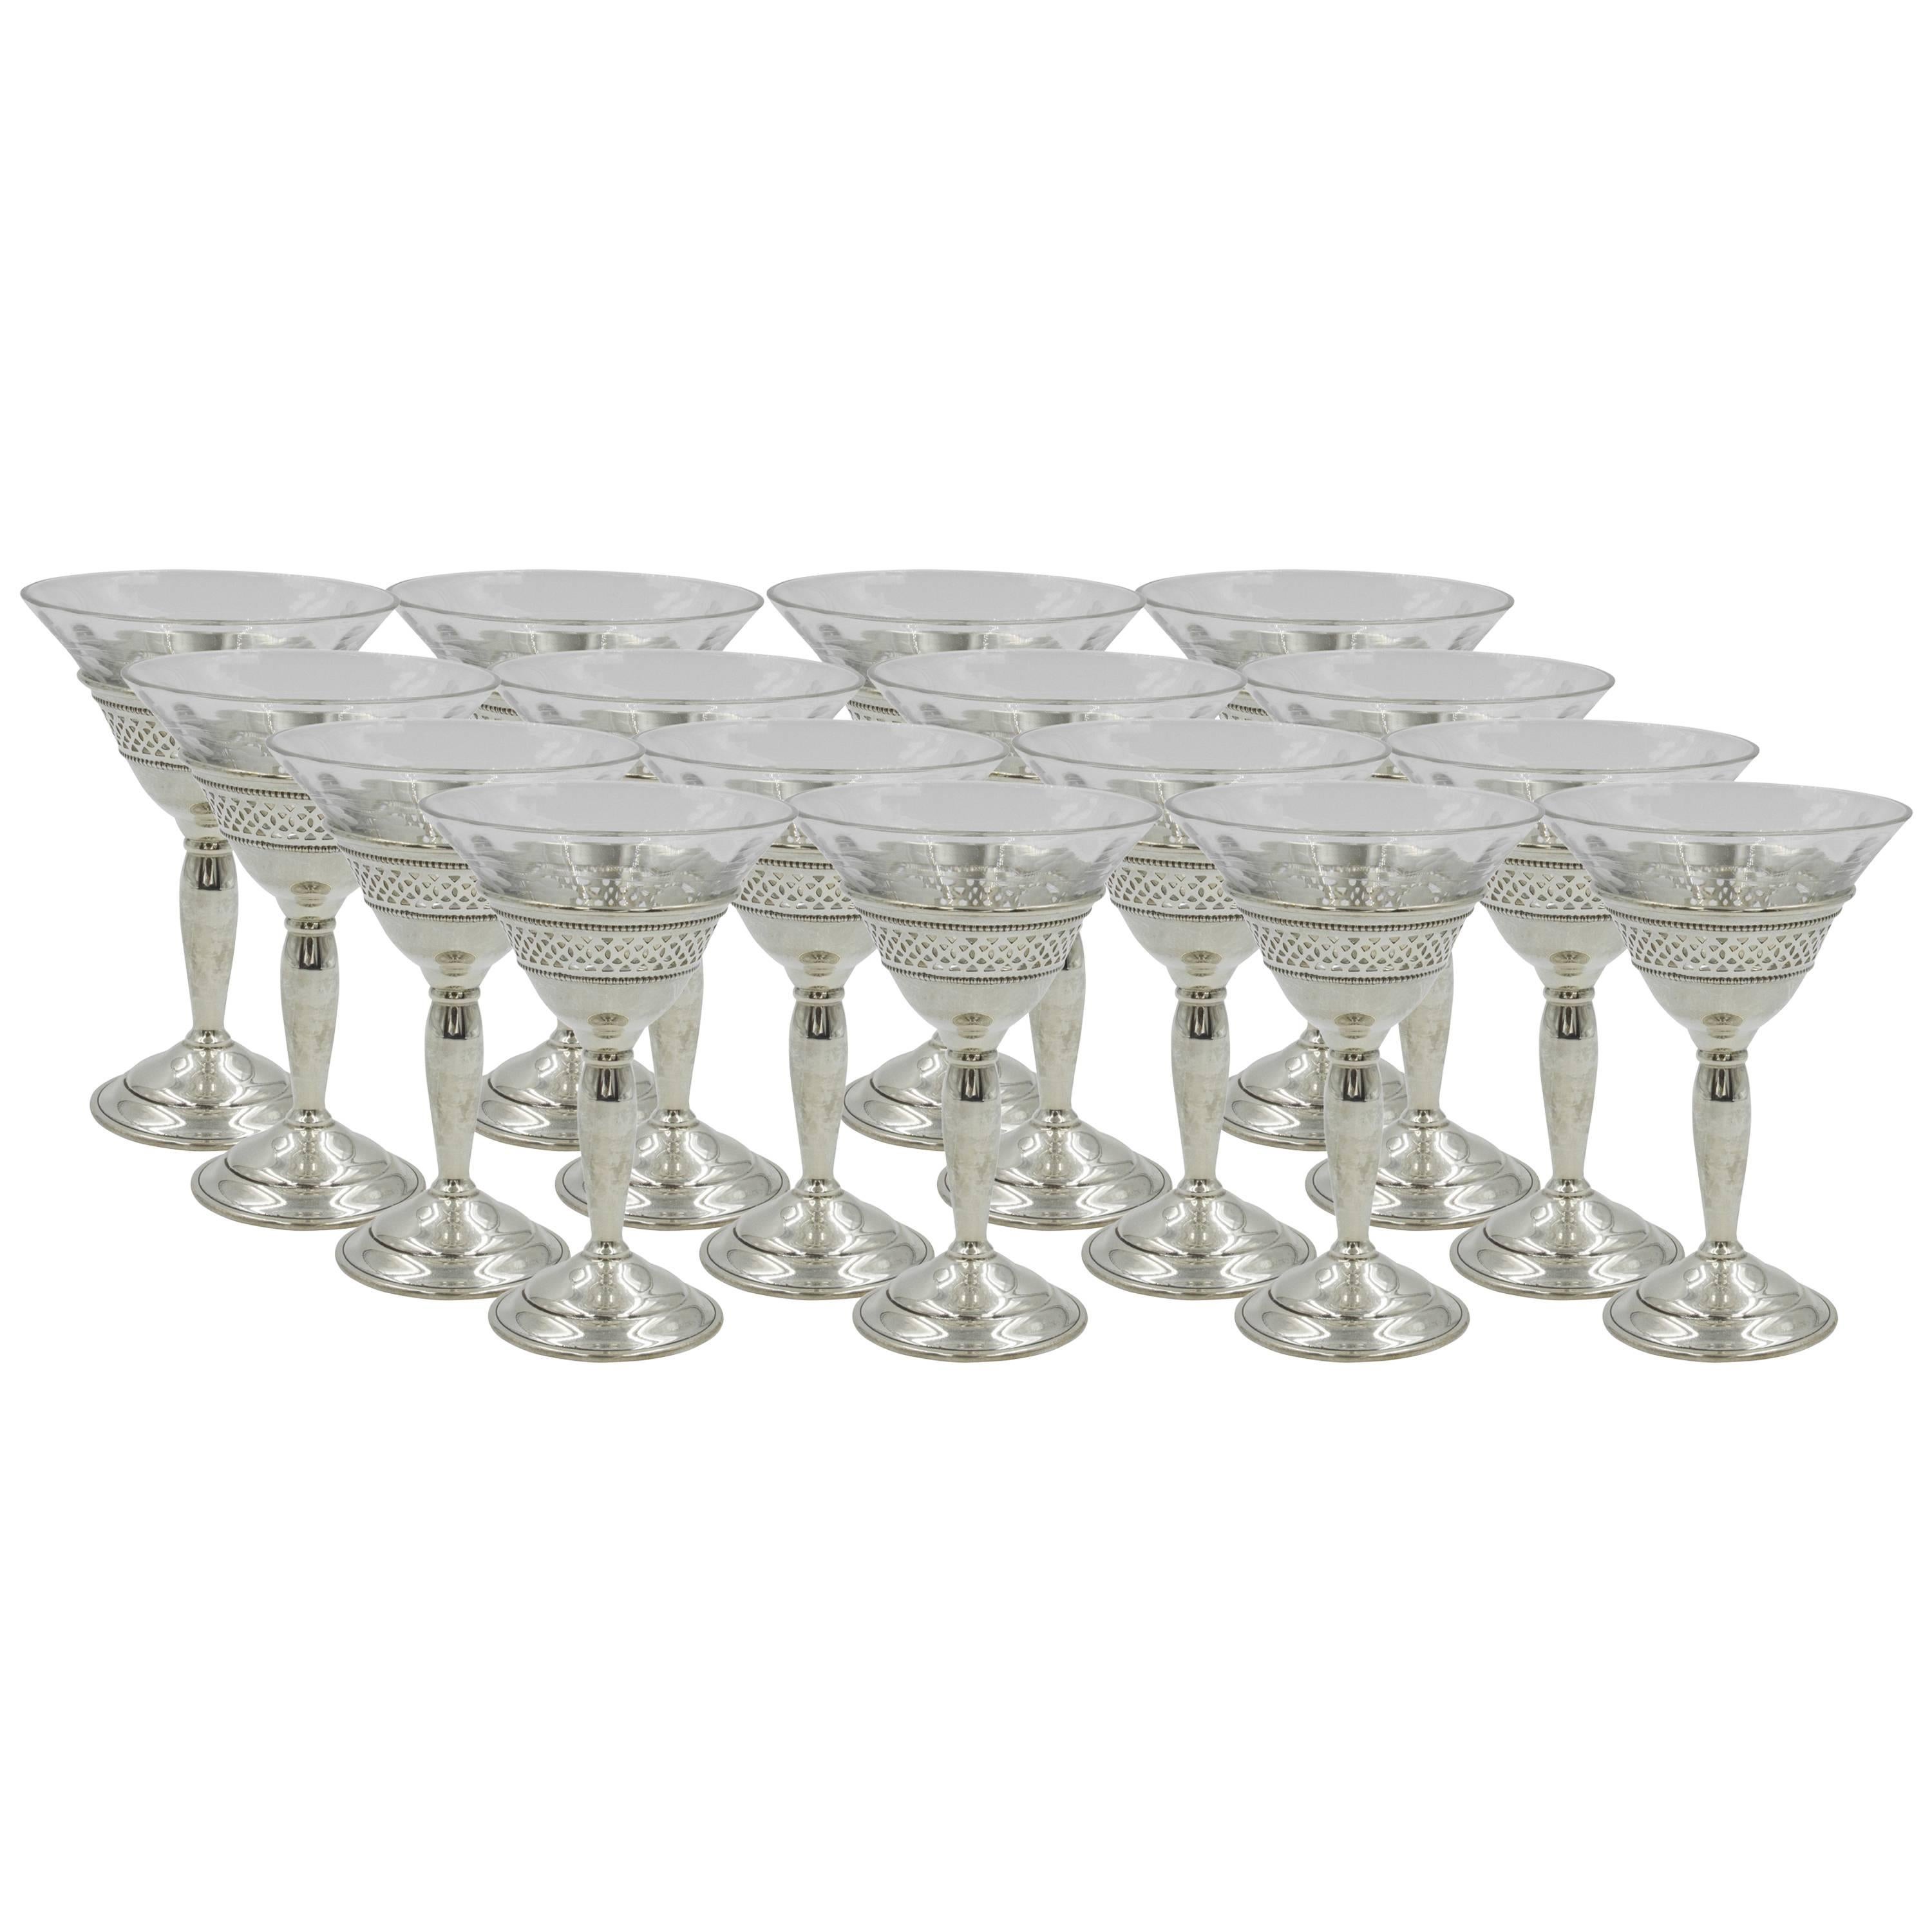 Set of 18 Crystal Cordials with Sterling Base